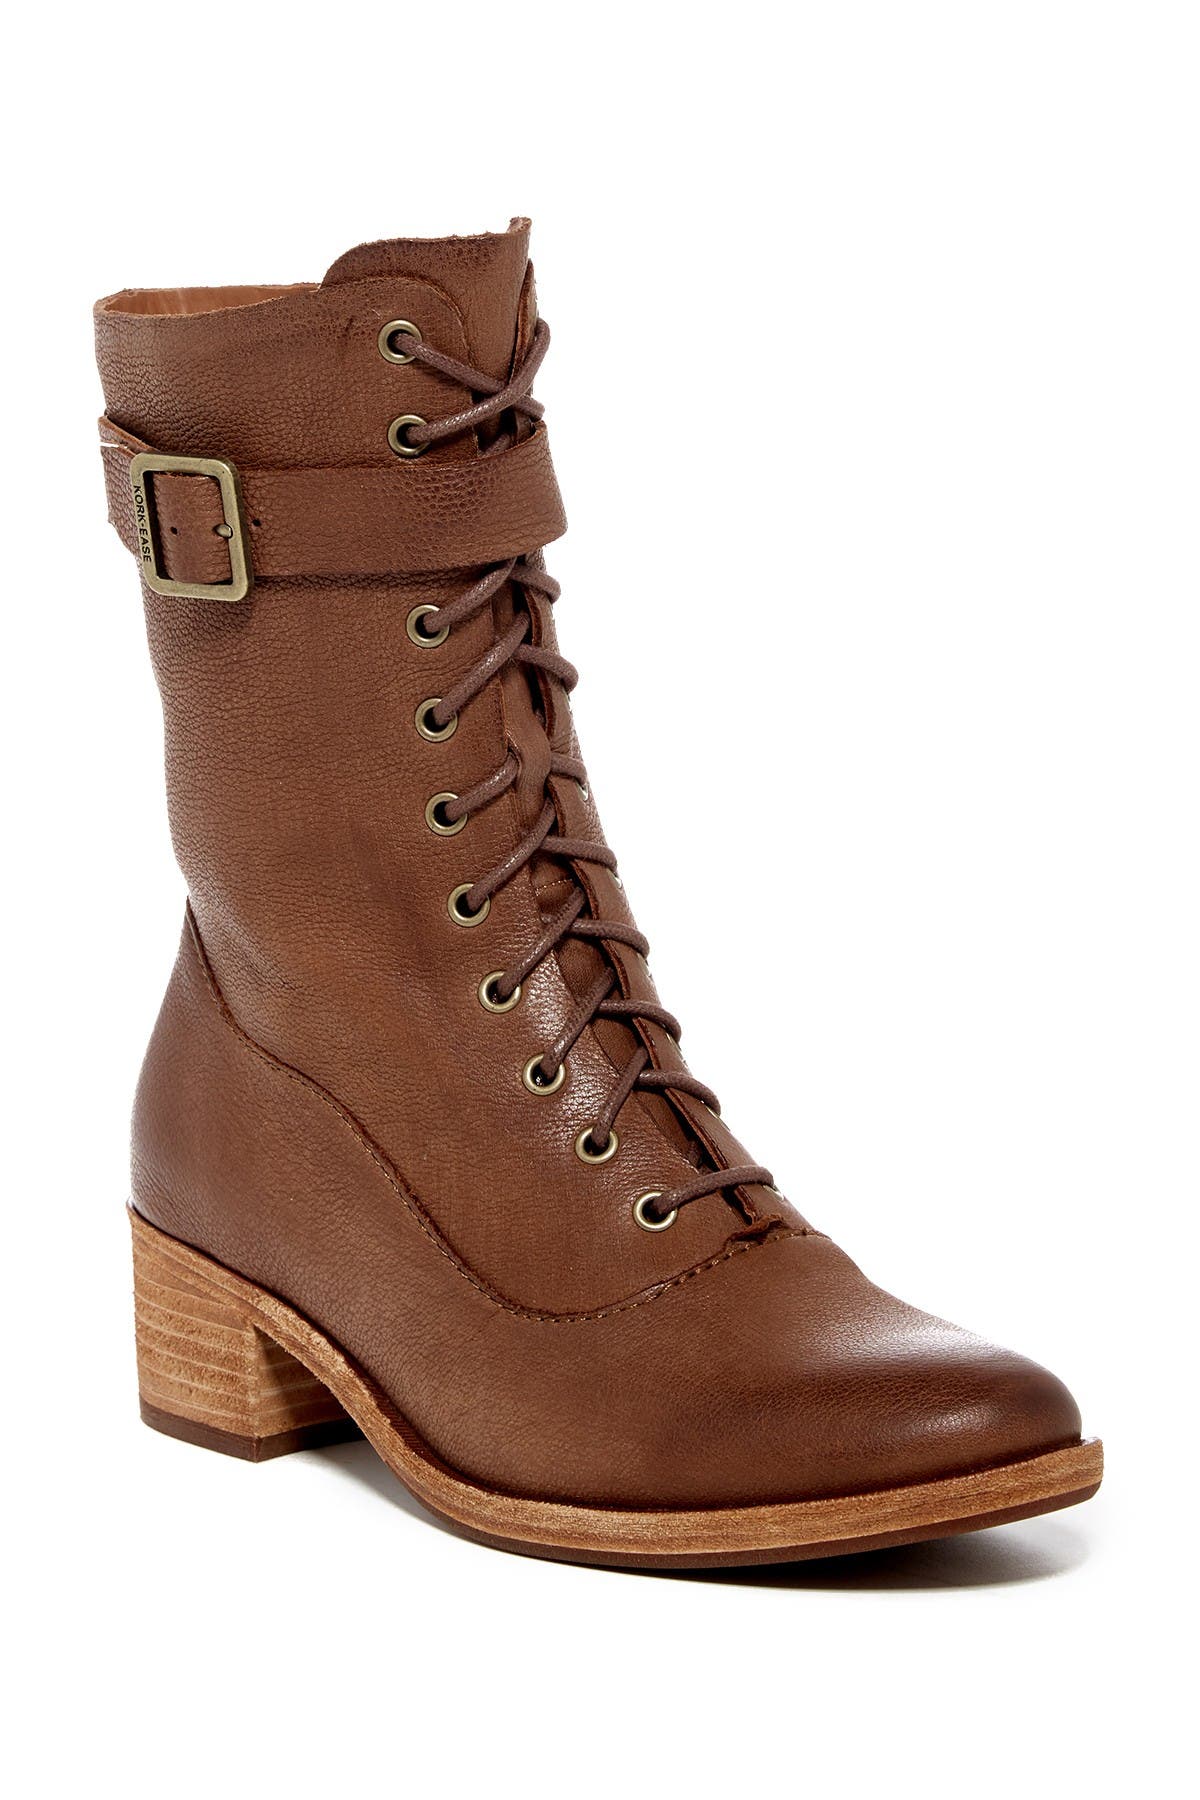 kork ease lace up boots